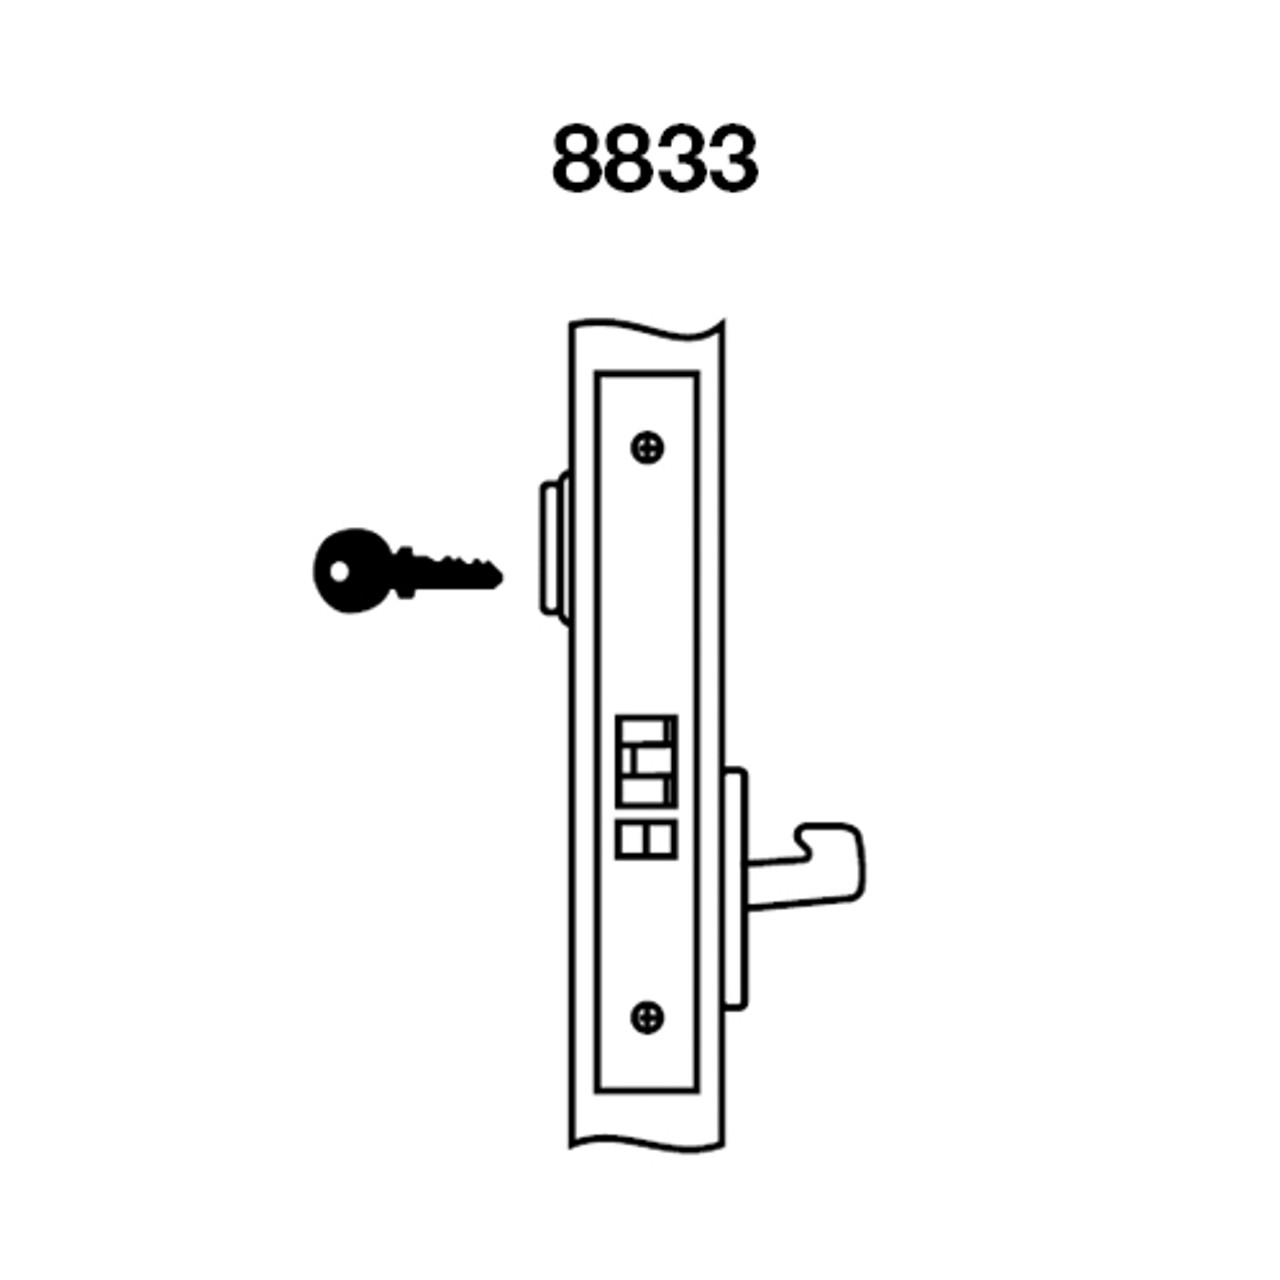 PBCN8833FL-630 Yale 8800FL Series Single Cylinder Mortise Exit Locks with Pacific Beach Lever in Satin Stainless Steel